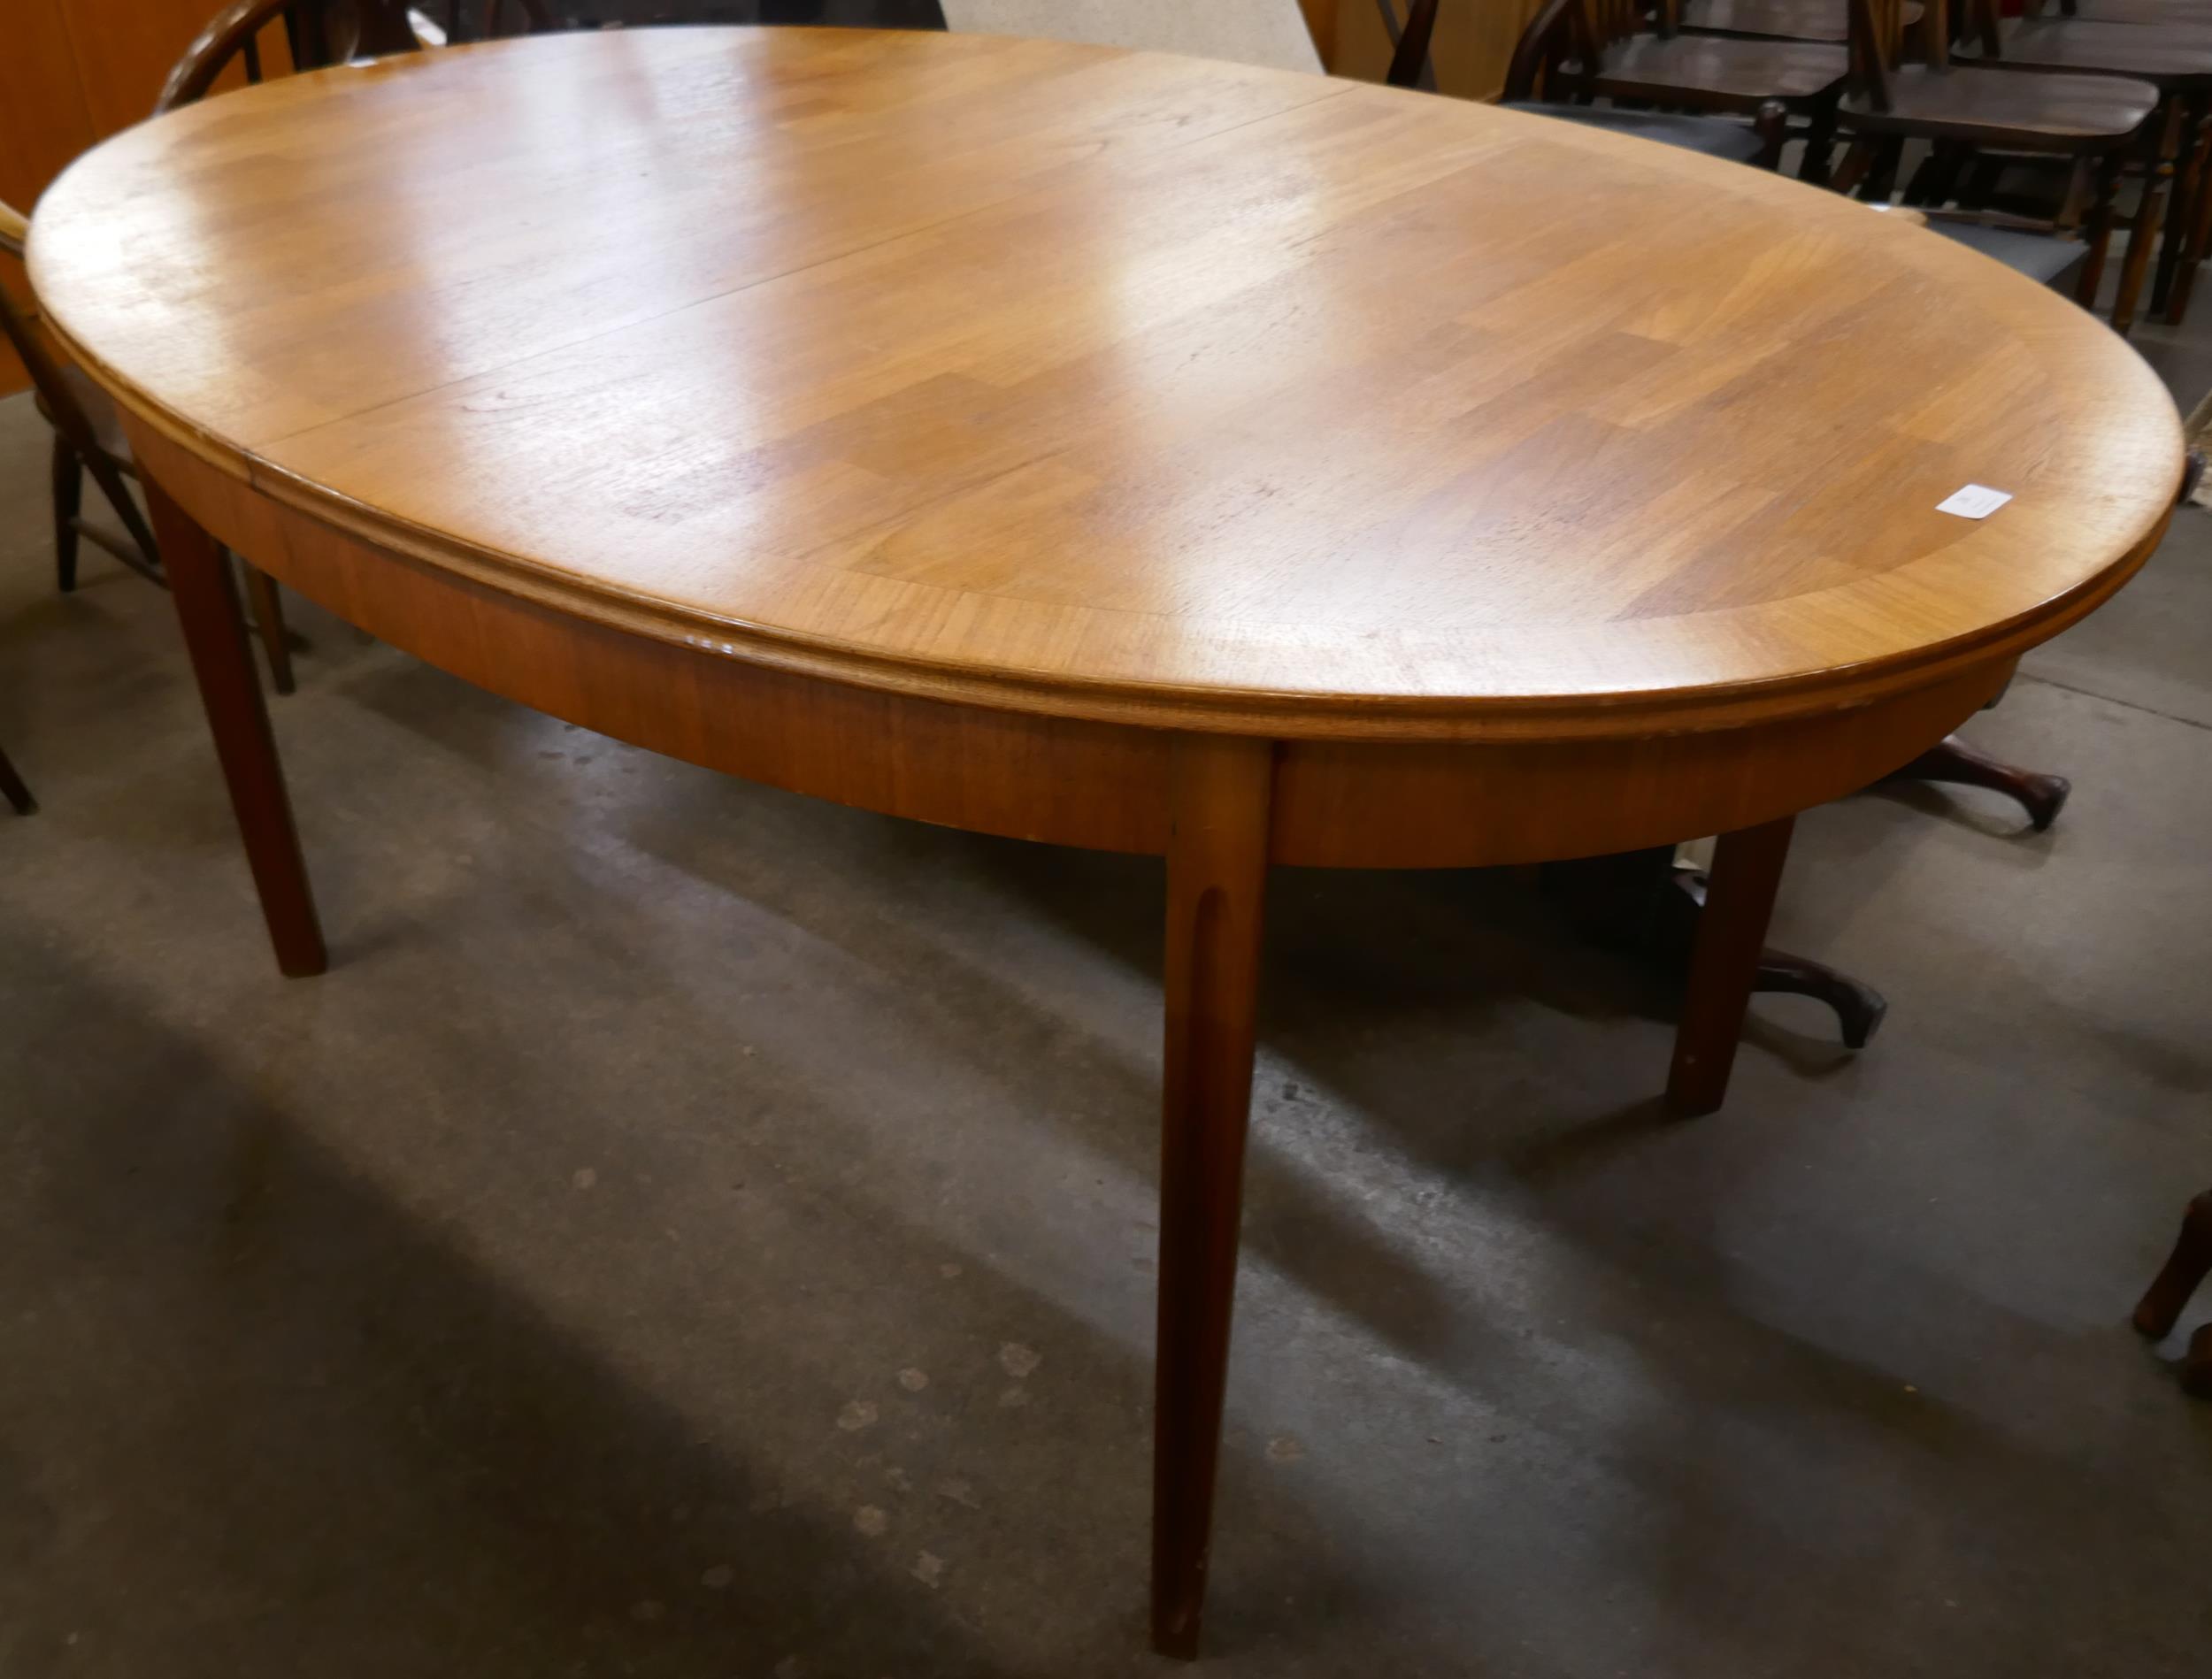 A William Lawrence teak oval extending dining table